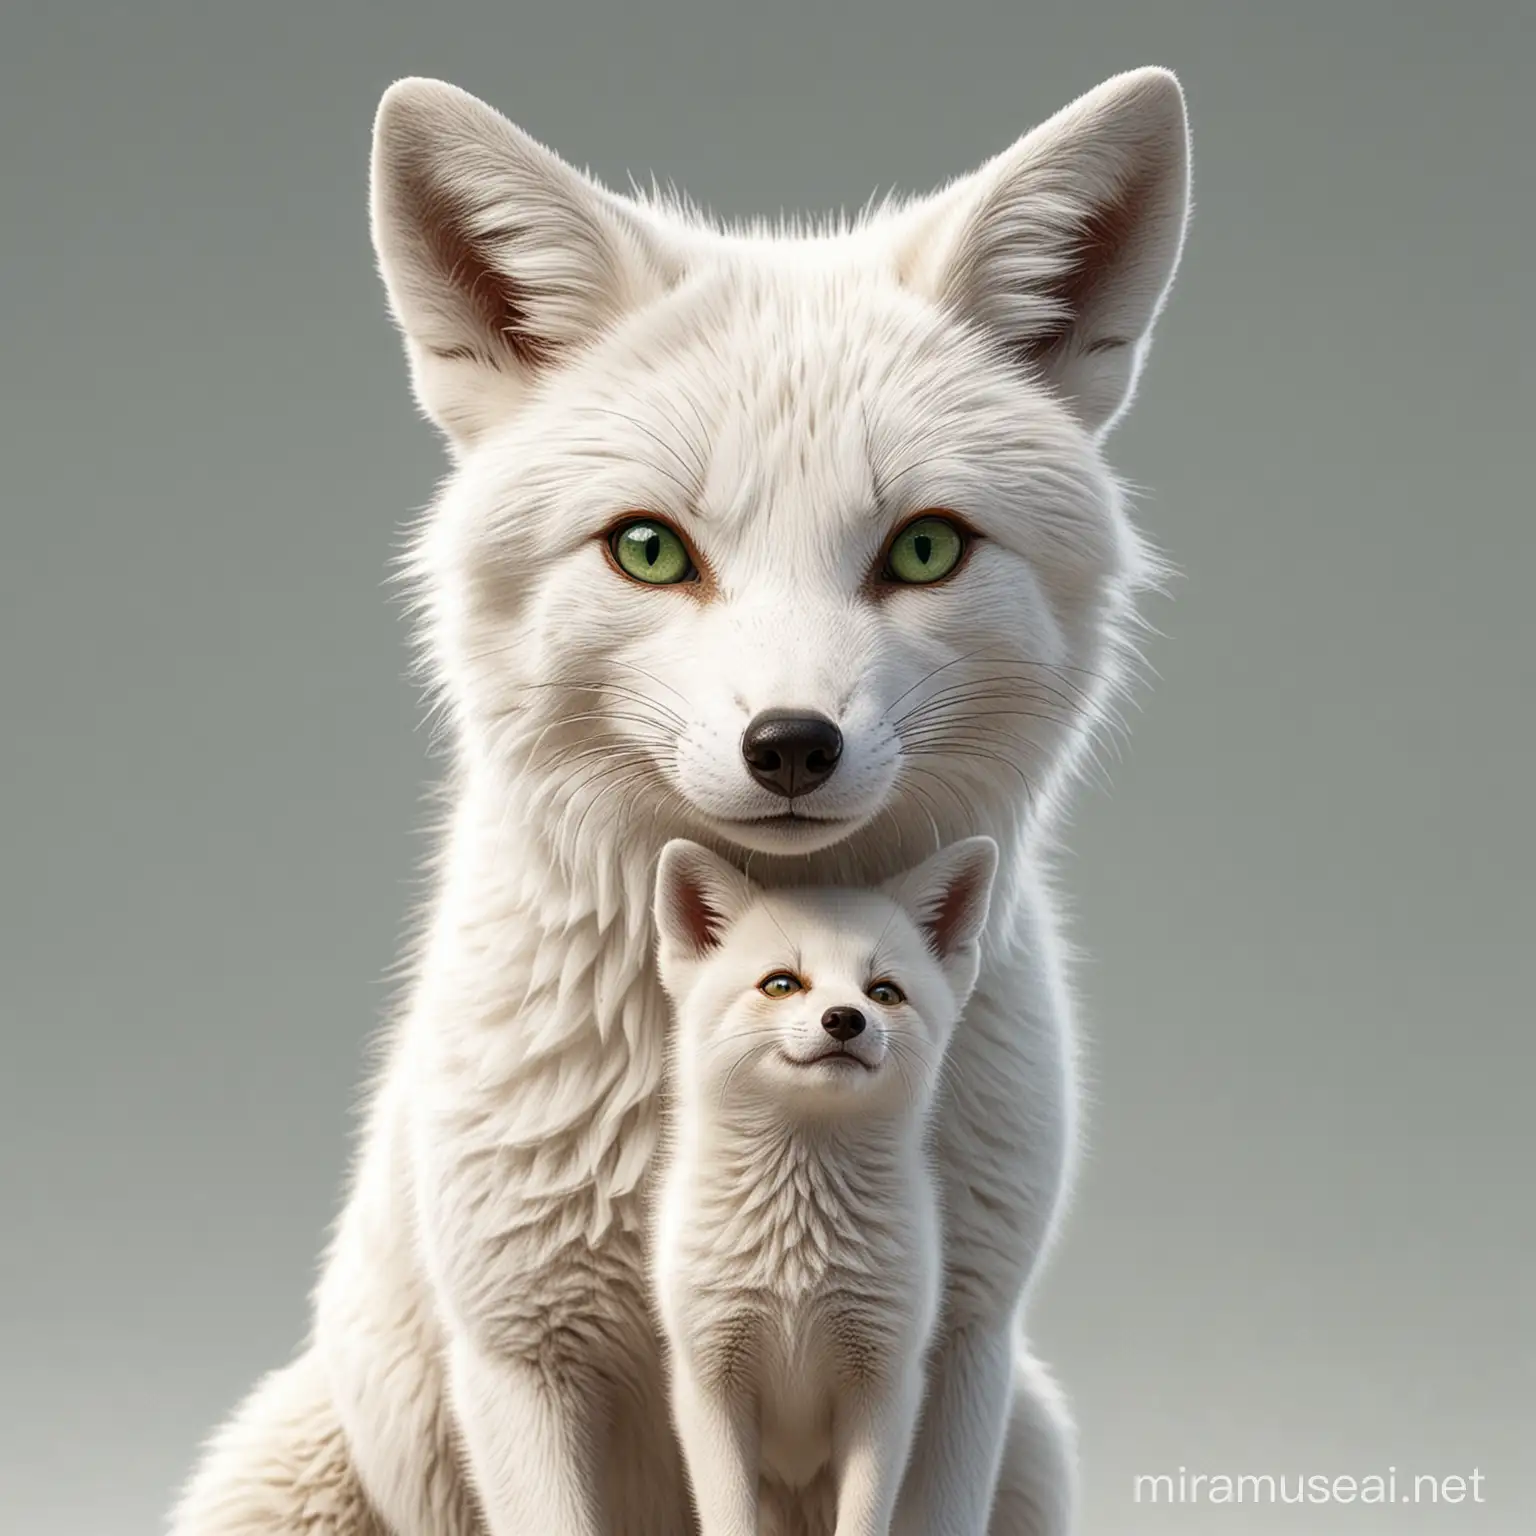 Adorable White Fox Mother Carrying Her Cute Baby Fox Heartwarming Cartoon Illustration